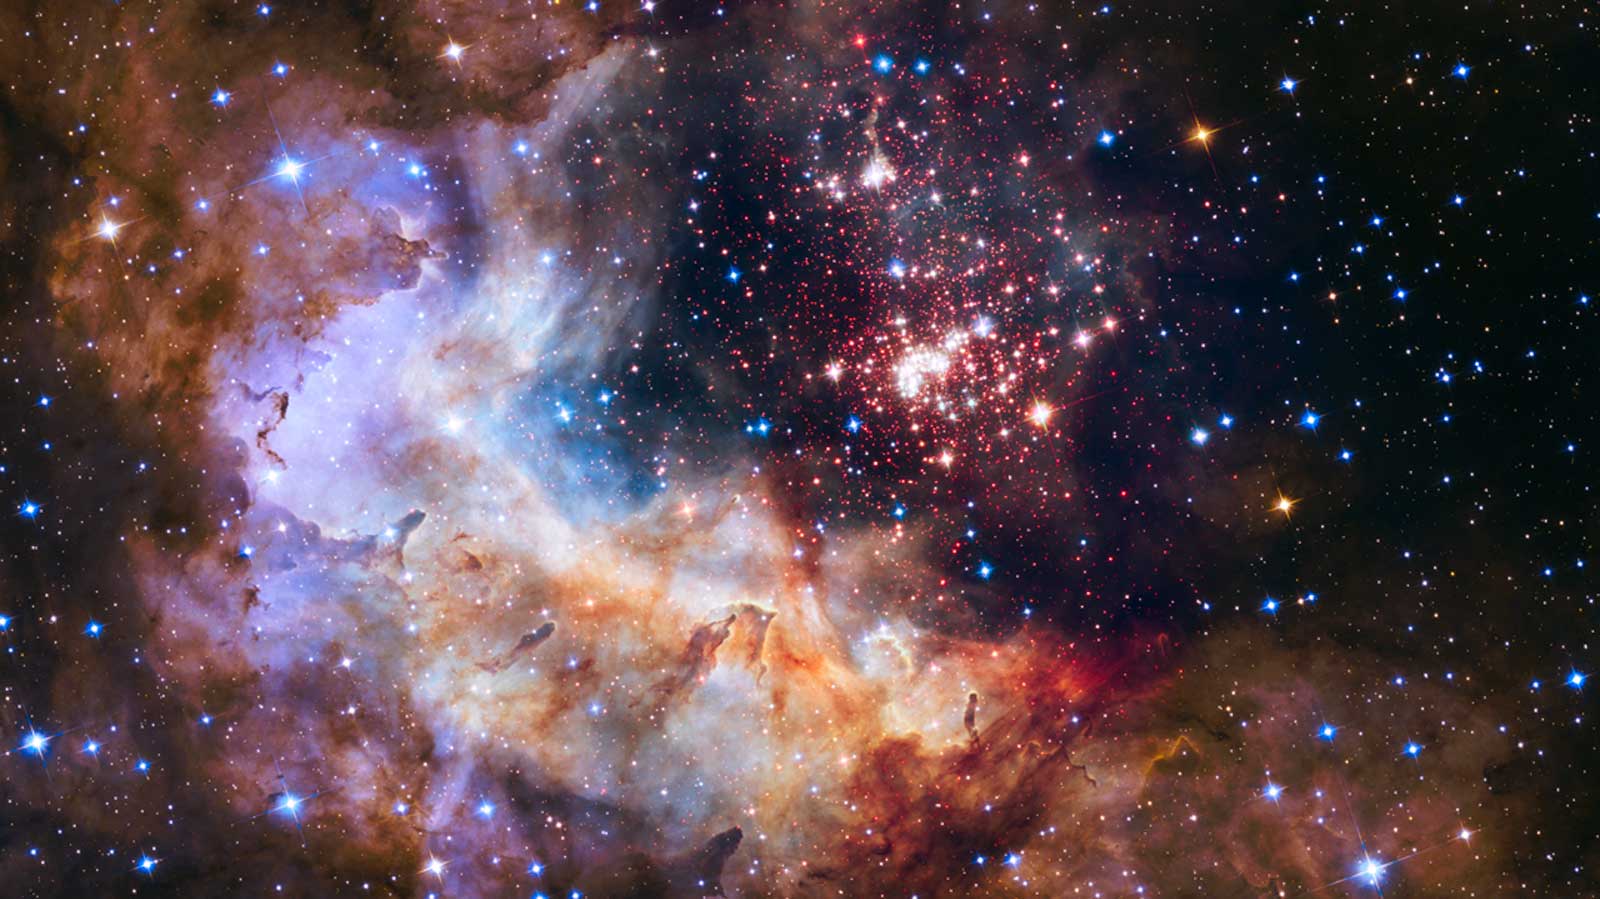 slide 5 - The brilliant tapestry of young stars flaring to life resembles a glittering fireworks display in this Hubble Space Telescope image. 